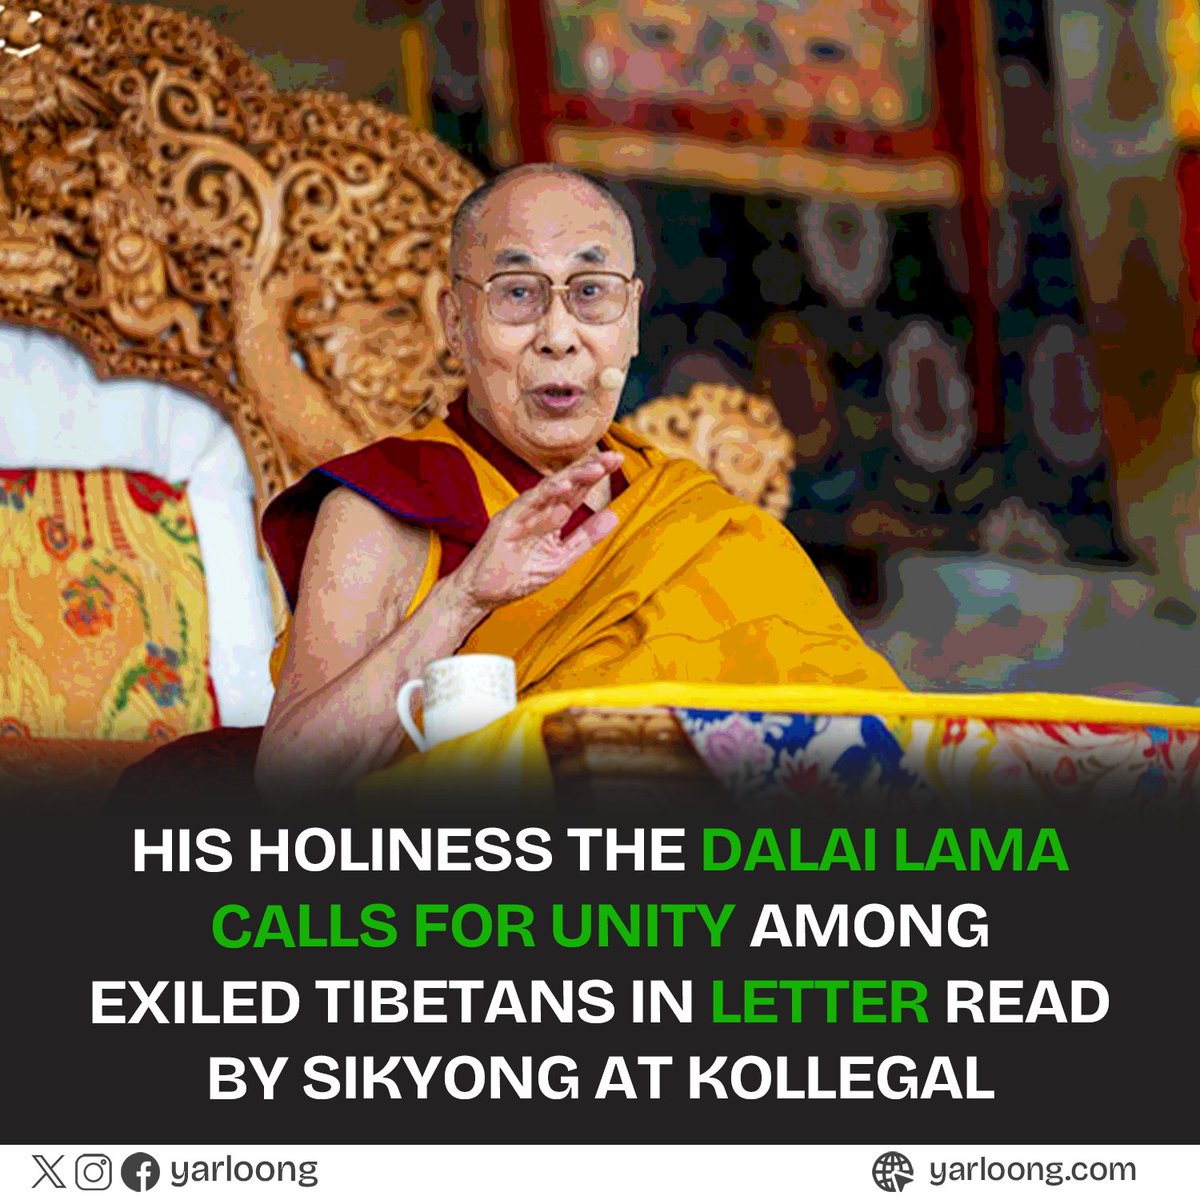 A letter read by @SikyongPenpaTsering His Holiness called for unity among Tibetans, warning against the dangers of division based on regional and religious lines. #DalaiLama #Unity #TibetanUnity #Kollegal #Sikyong #Tibetan